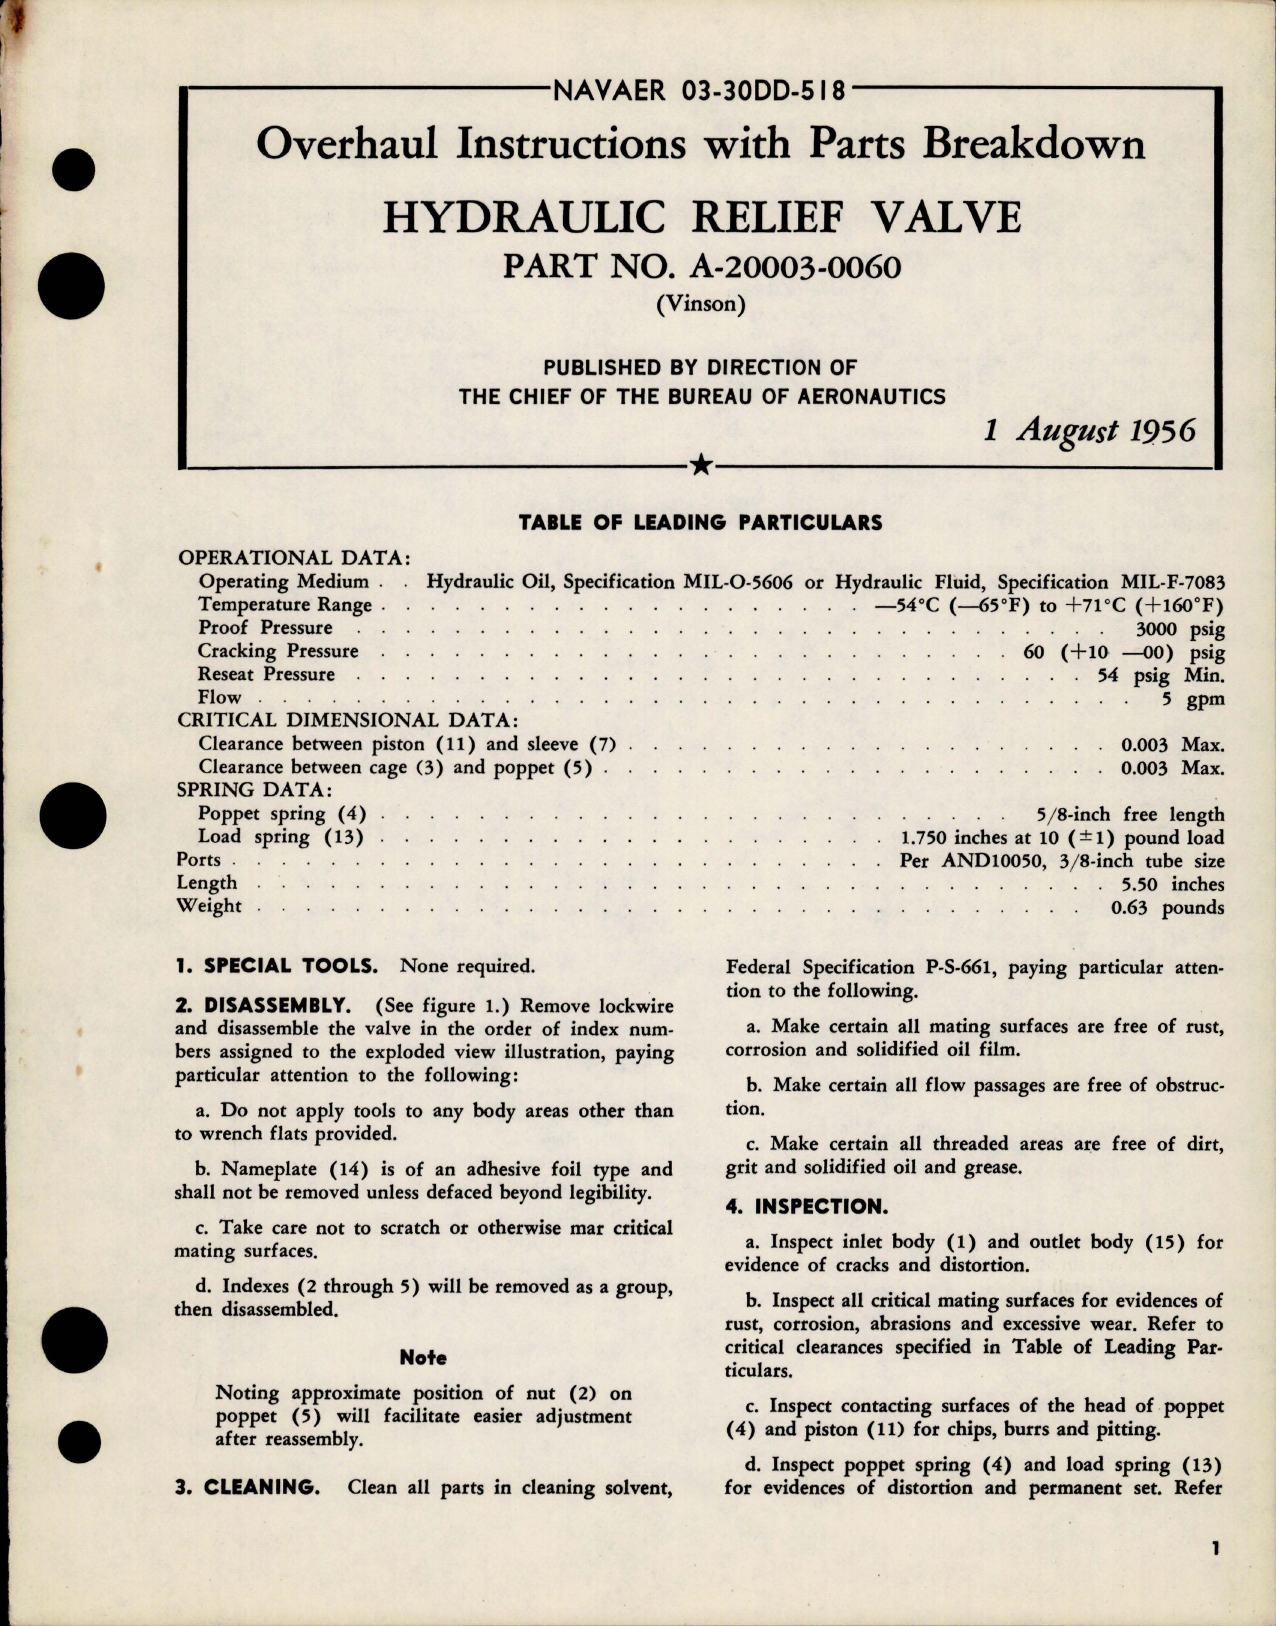 Sample page 1 from AirCorps Library document: Overhaul Instructions with Parts Breakdown for Hydraulic Relief Valve - Part A-20003-0060 